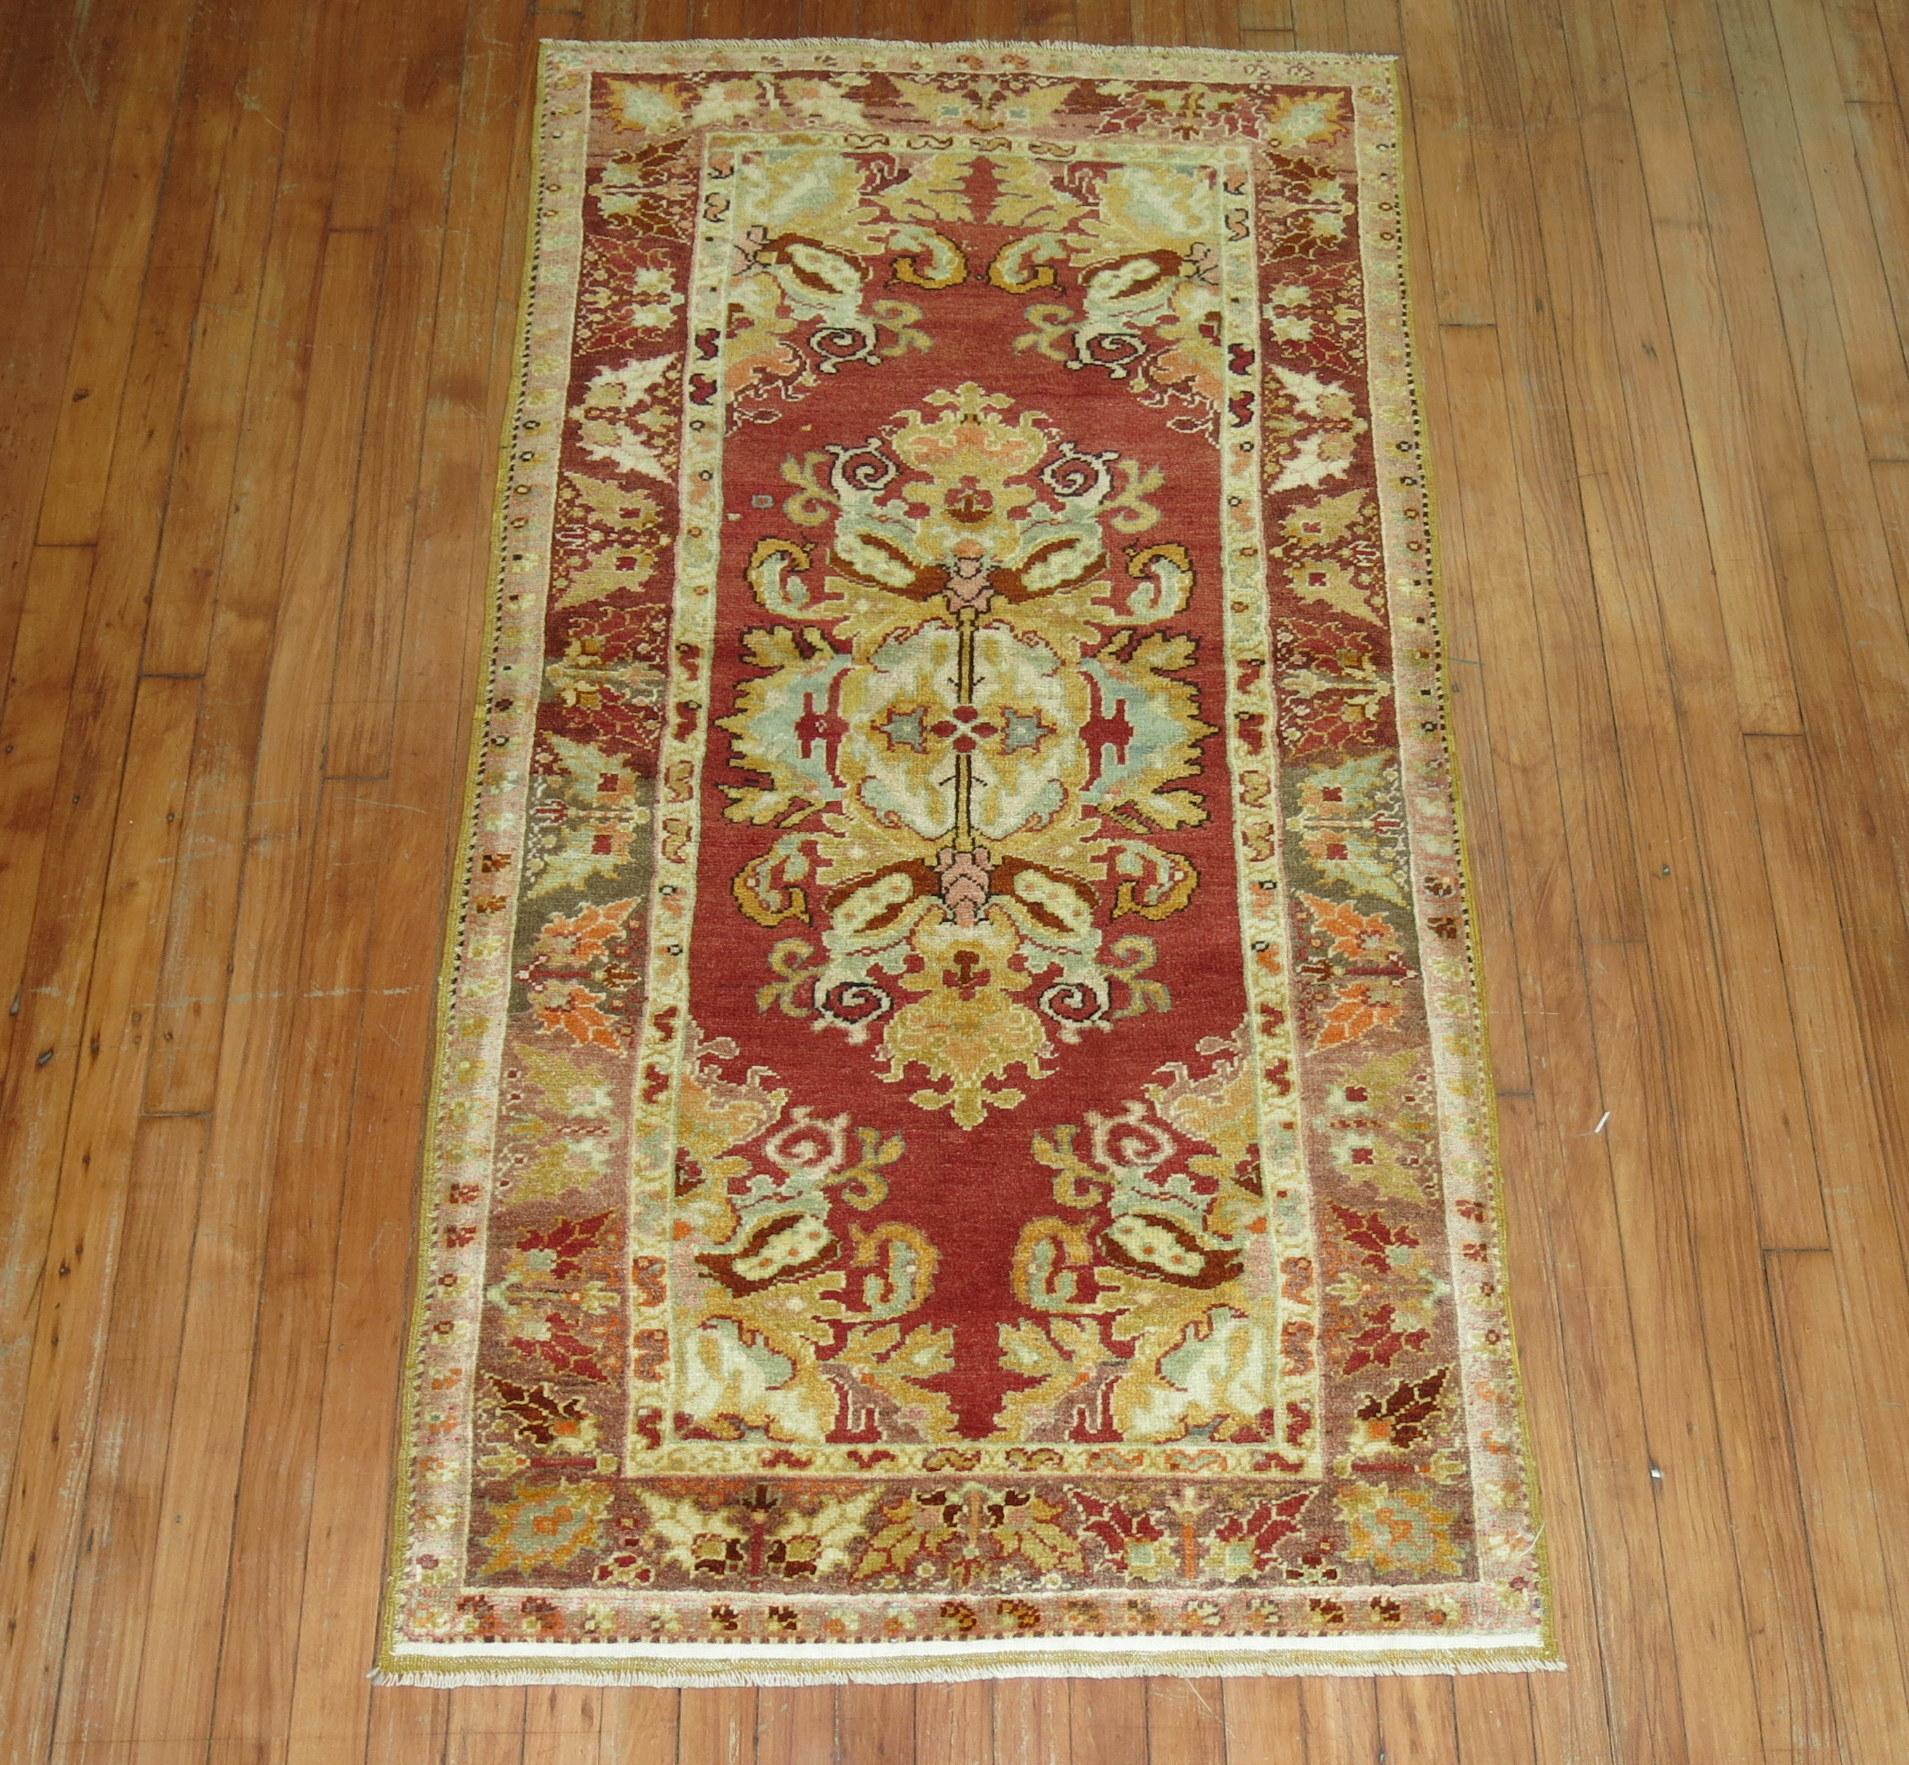 A scatter-size antique Turkish Oushak rug, circa second quarter of the 20th century.

2'10'' x 5'6''